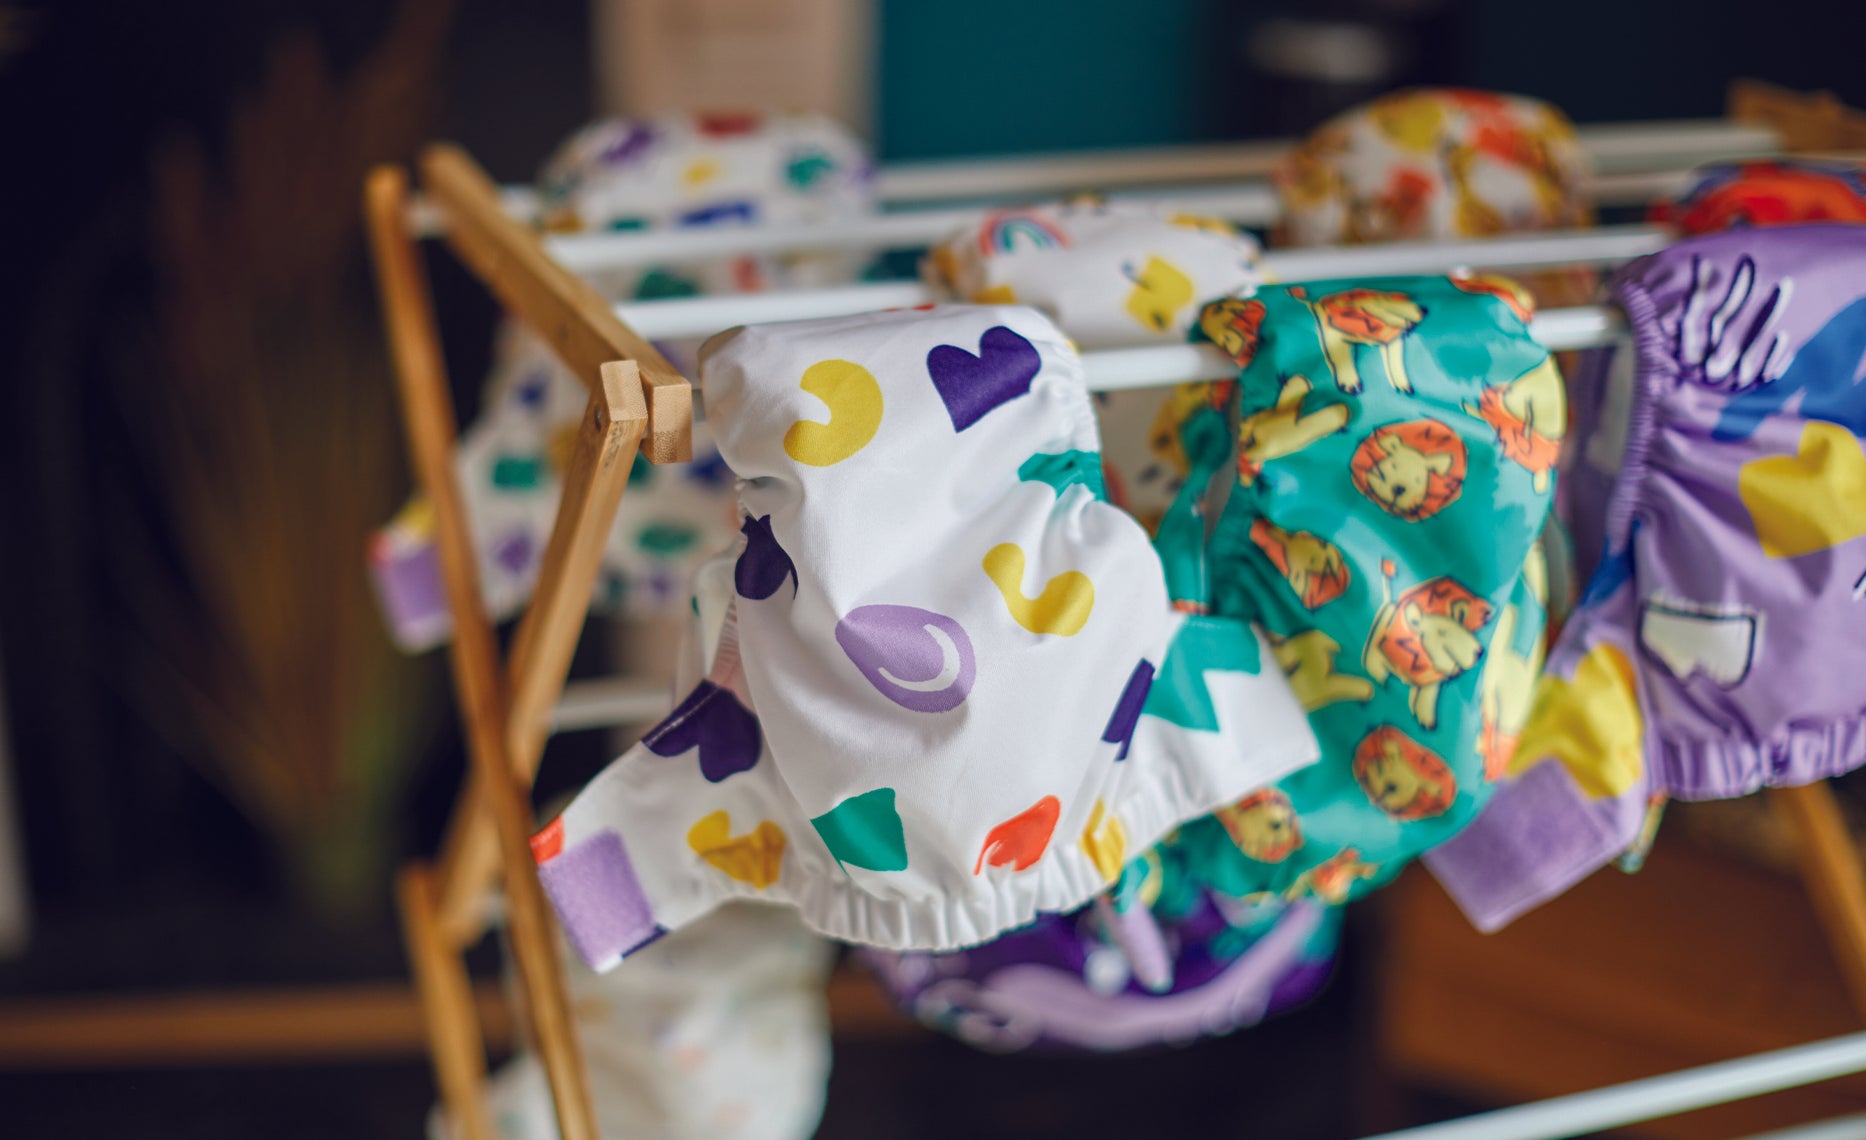 How Bambino Mio is trying to make reusable nappies normal